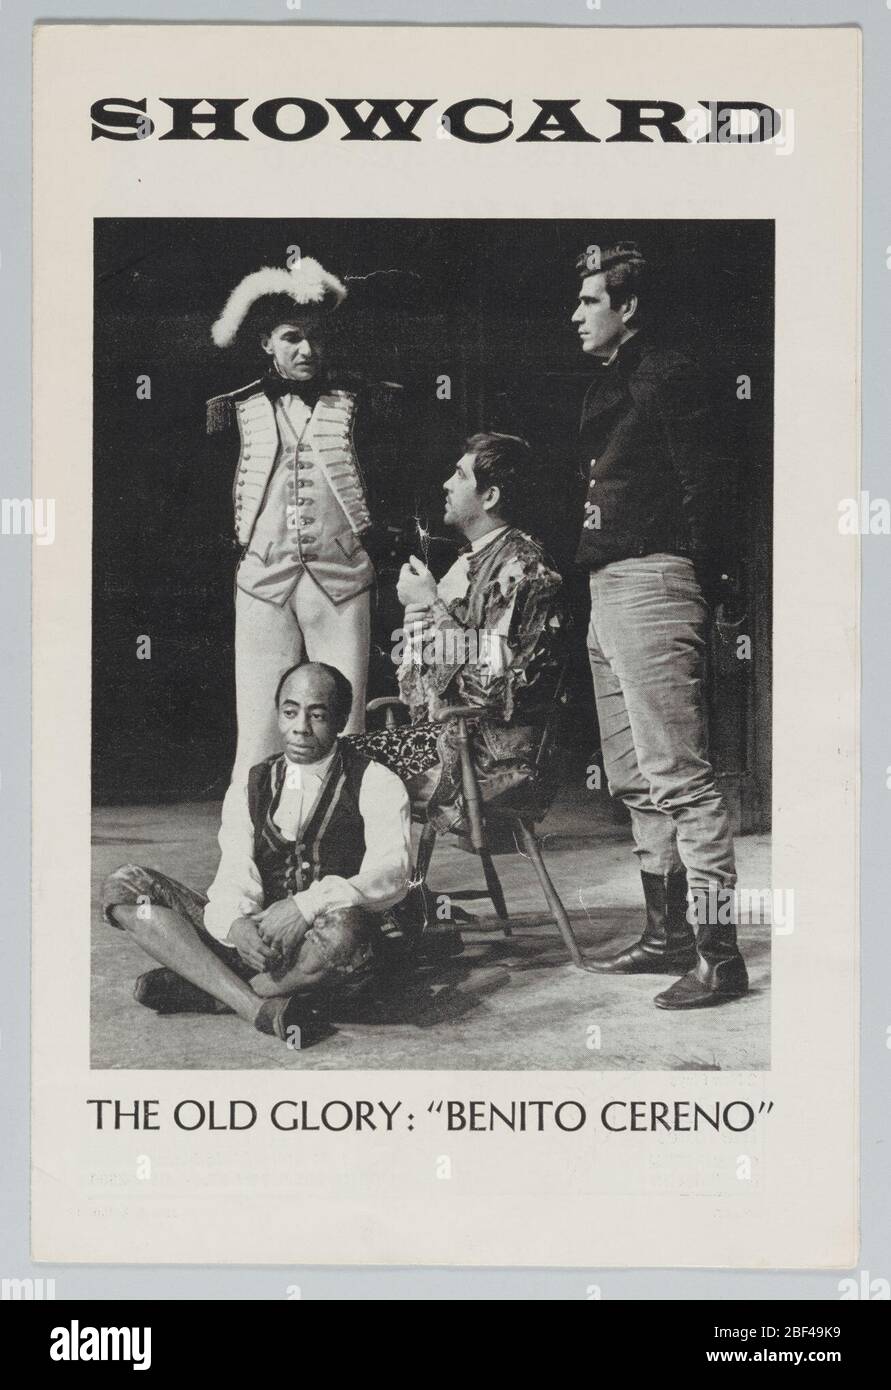 Theatre program for The Old Glory Benito Cereno. Showcard for The Old Glory: 'Benito Cereno'. White background with black lettering; black and white photograph at center featuring five men in costume; two men are standing wearing military uniforms, one man sits in a wooden chair, while the last man sits on the floor. Stock Photo